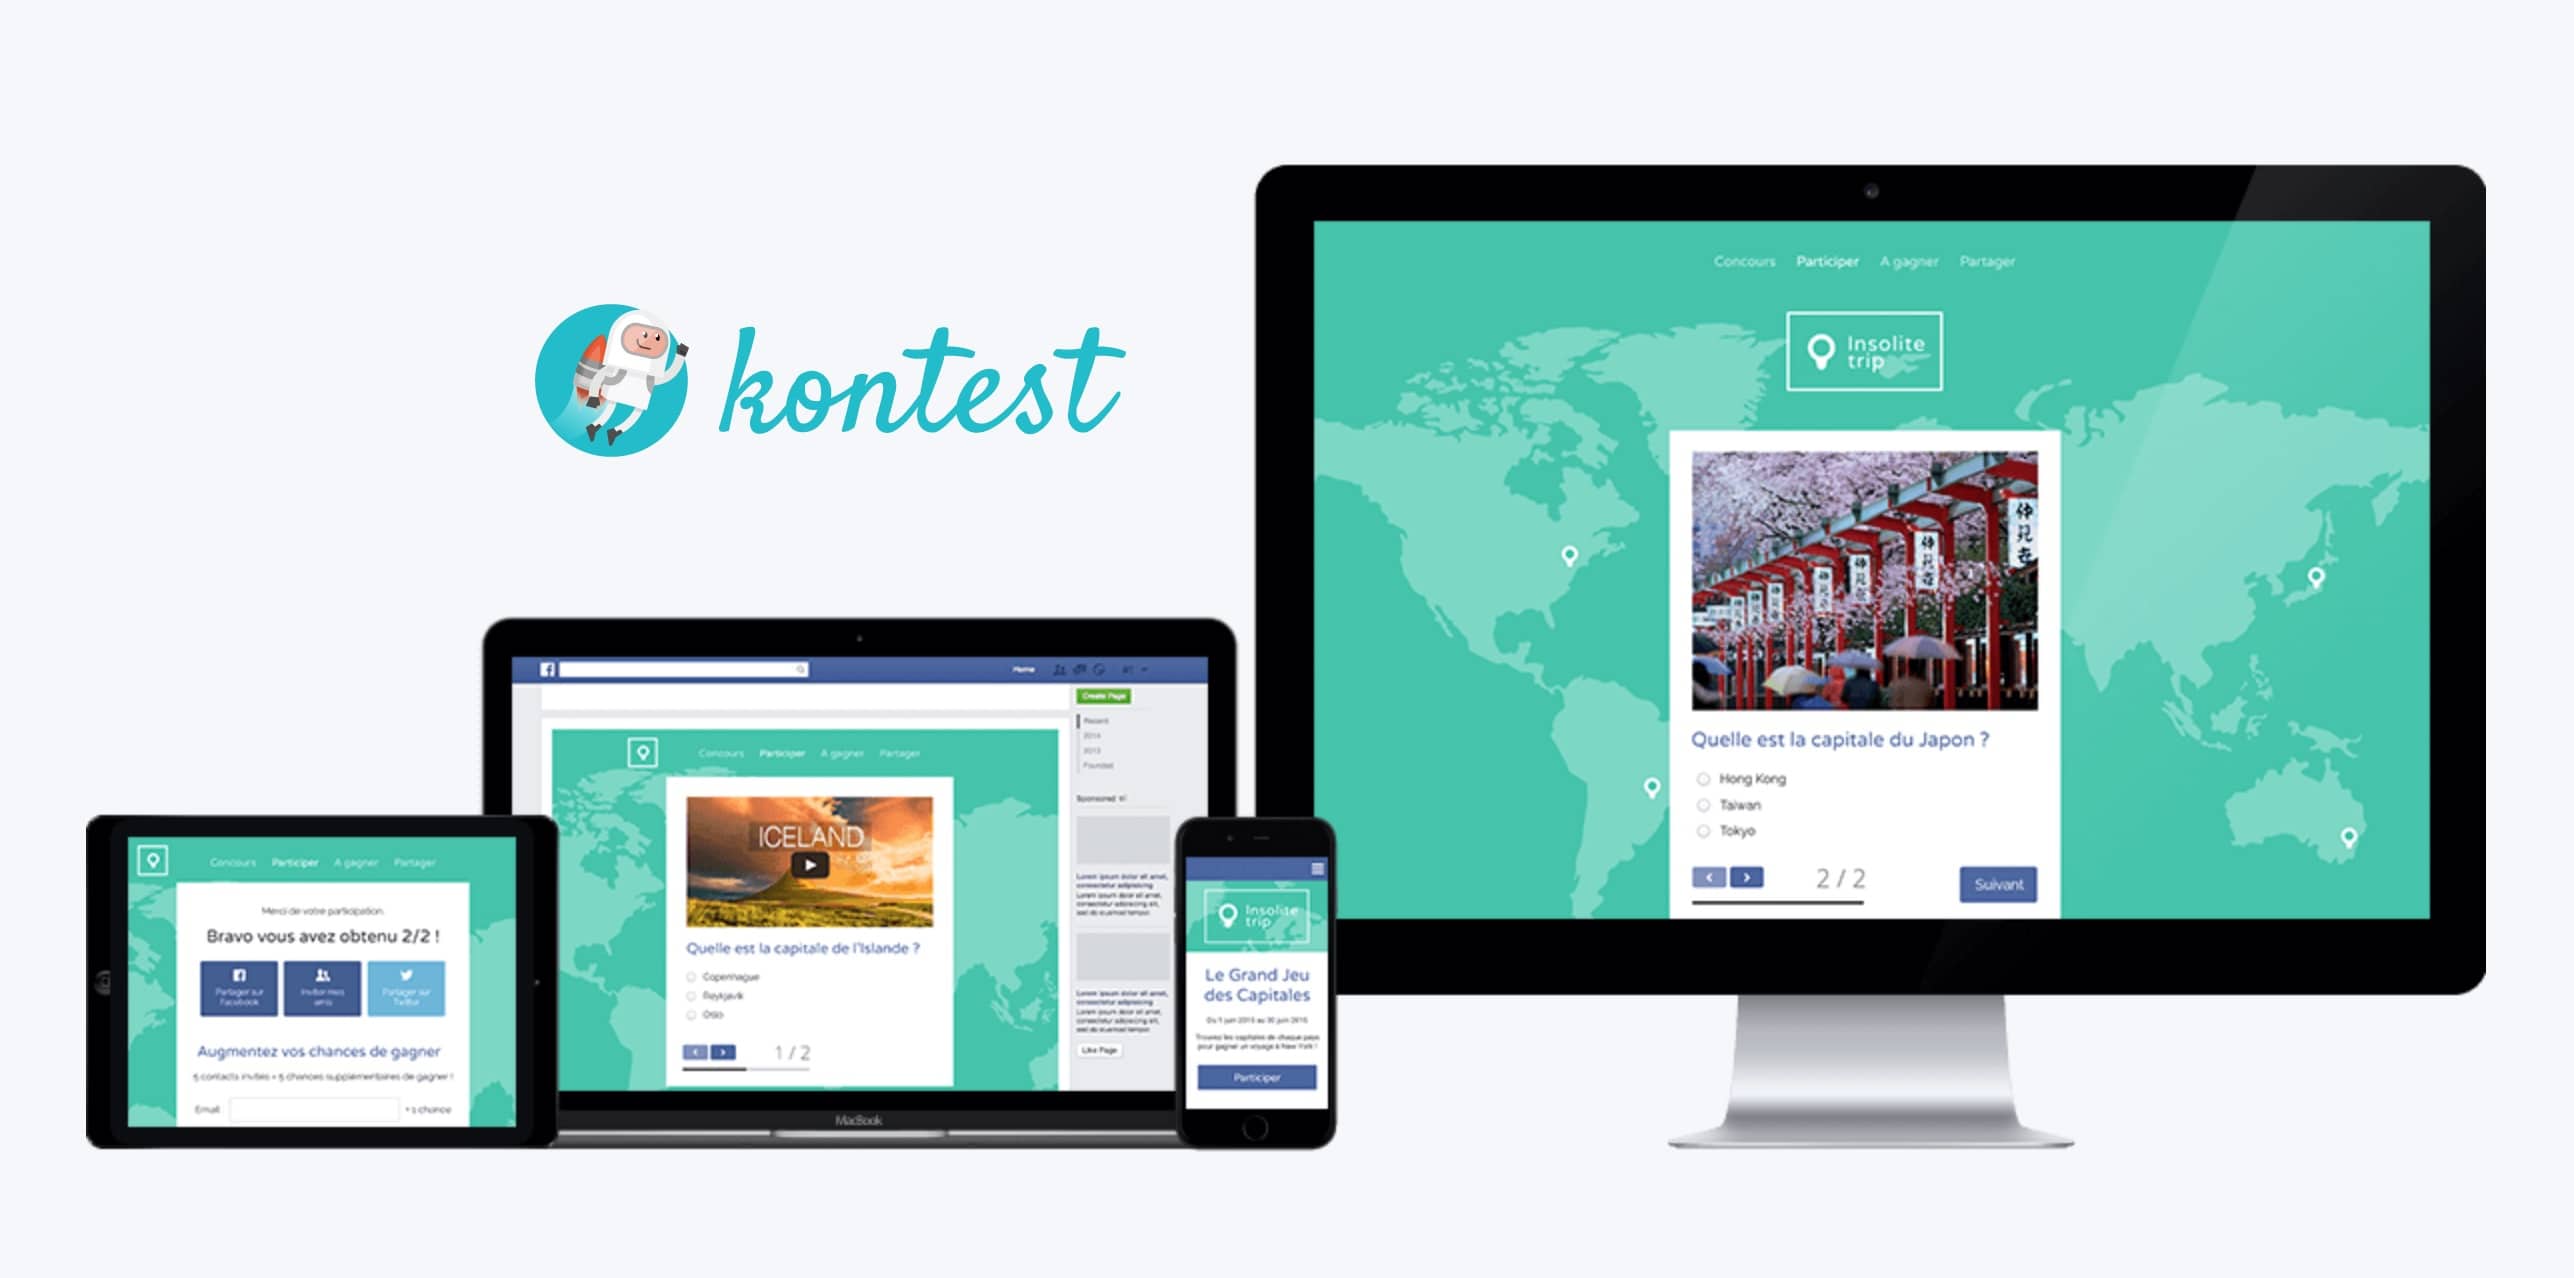 outils community manager 2019 Kontest